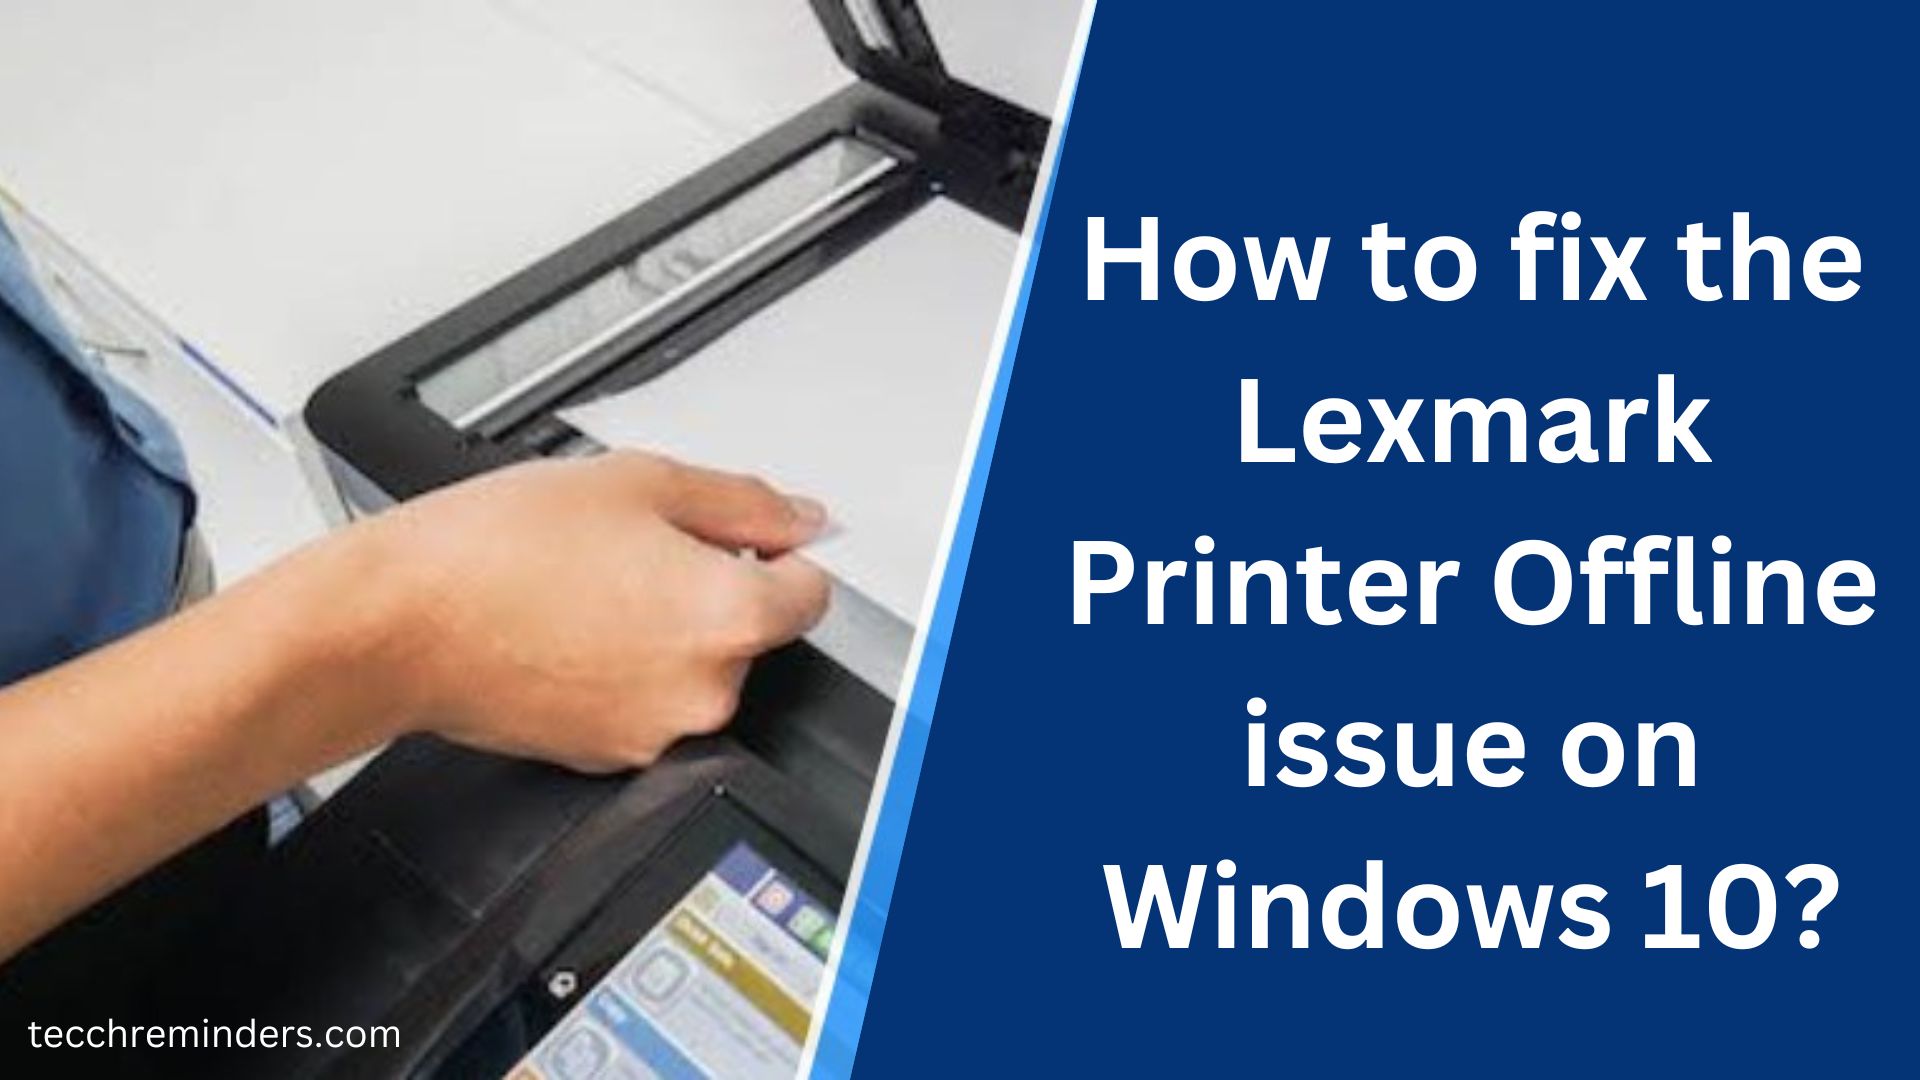 How to fix the Lexmark Printer Offline issue on Windows 10